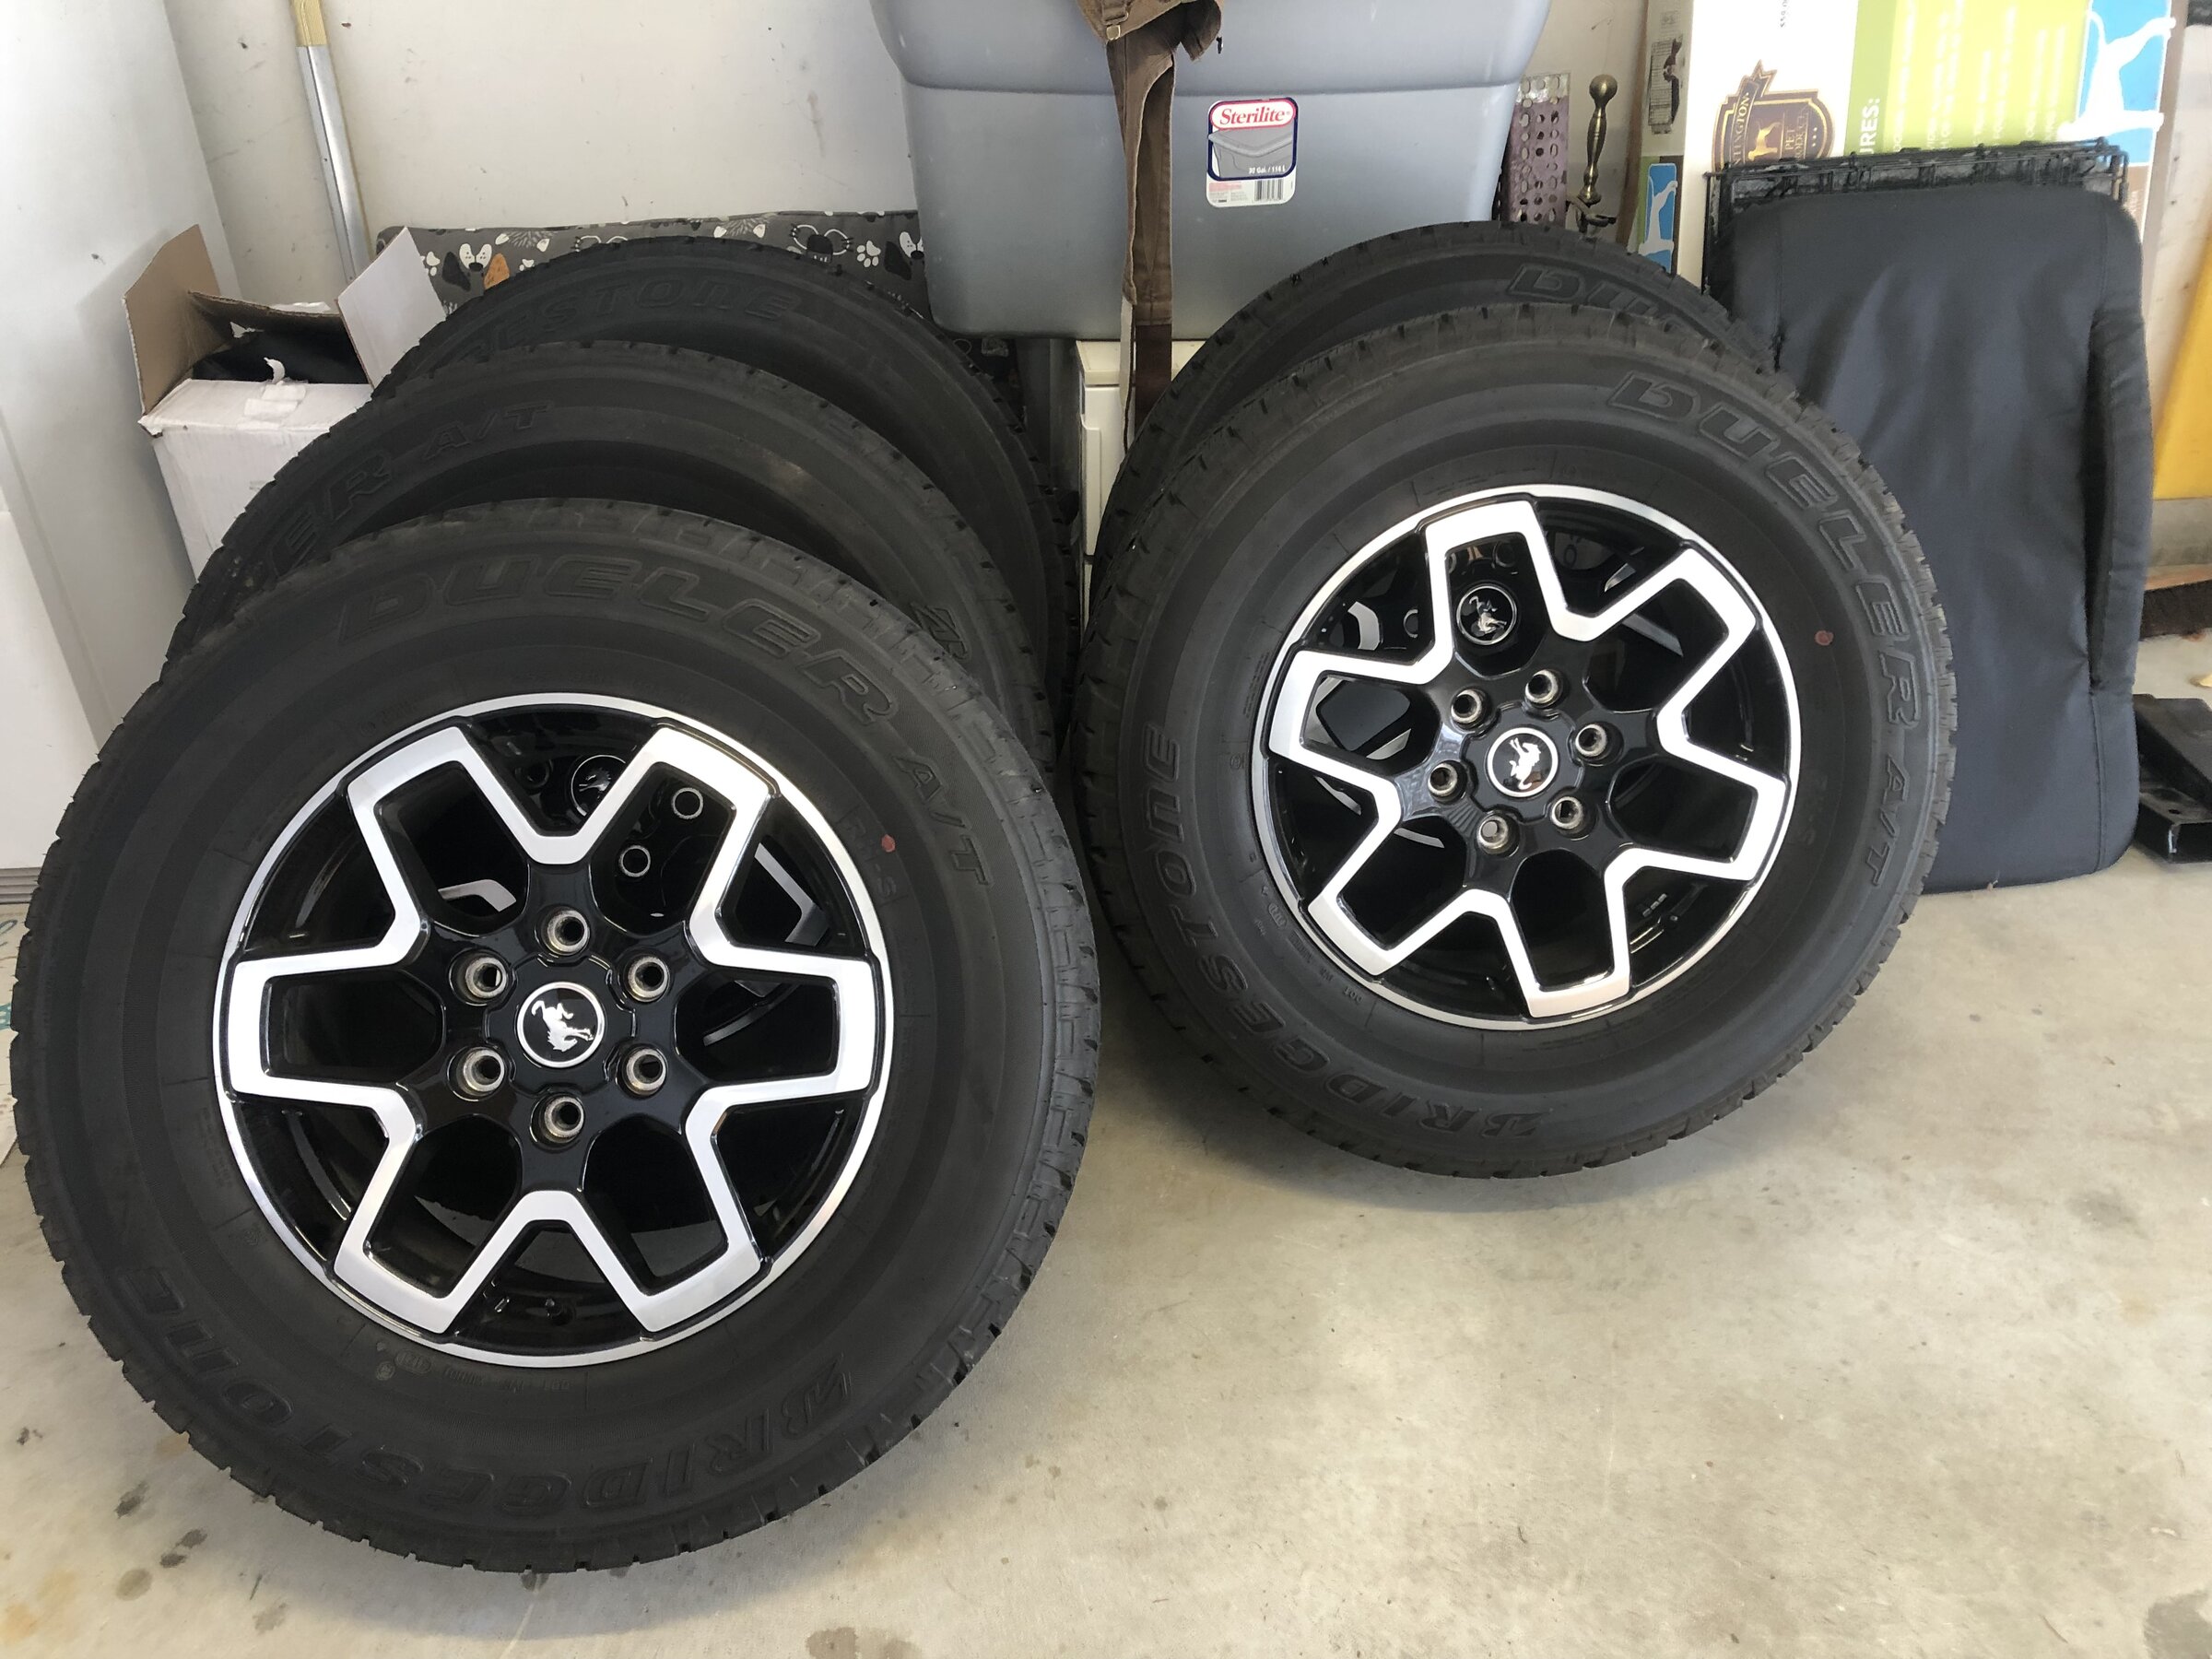 Ford Bronco OBX Wheels, Tires, TPMS and Lugnuts for sale IMG_8501.JPG